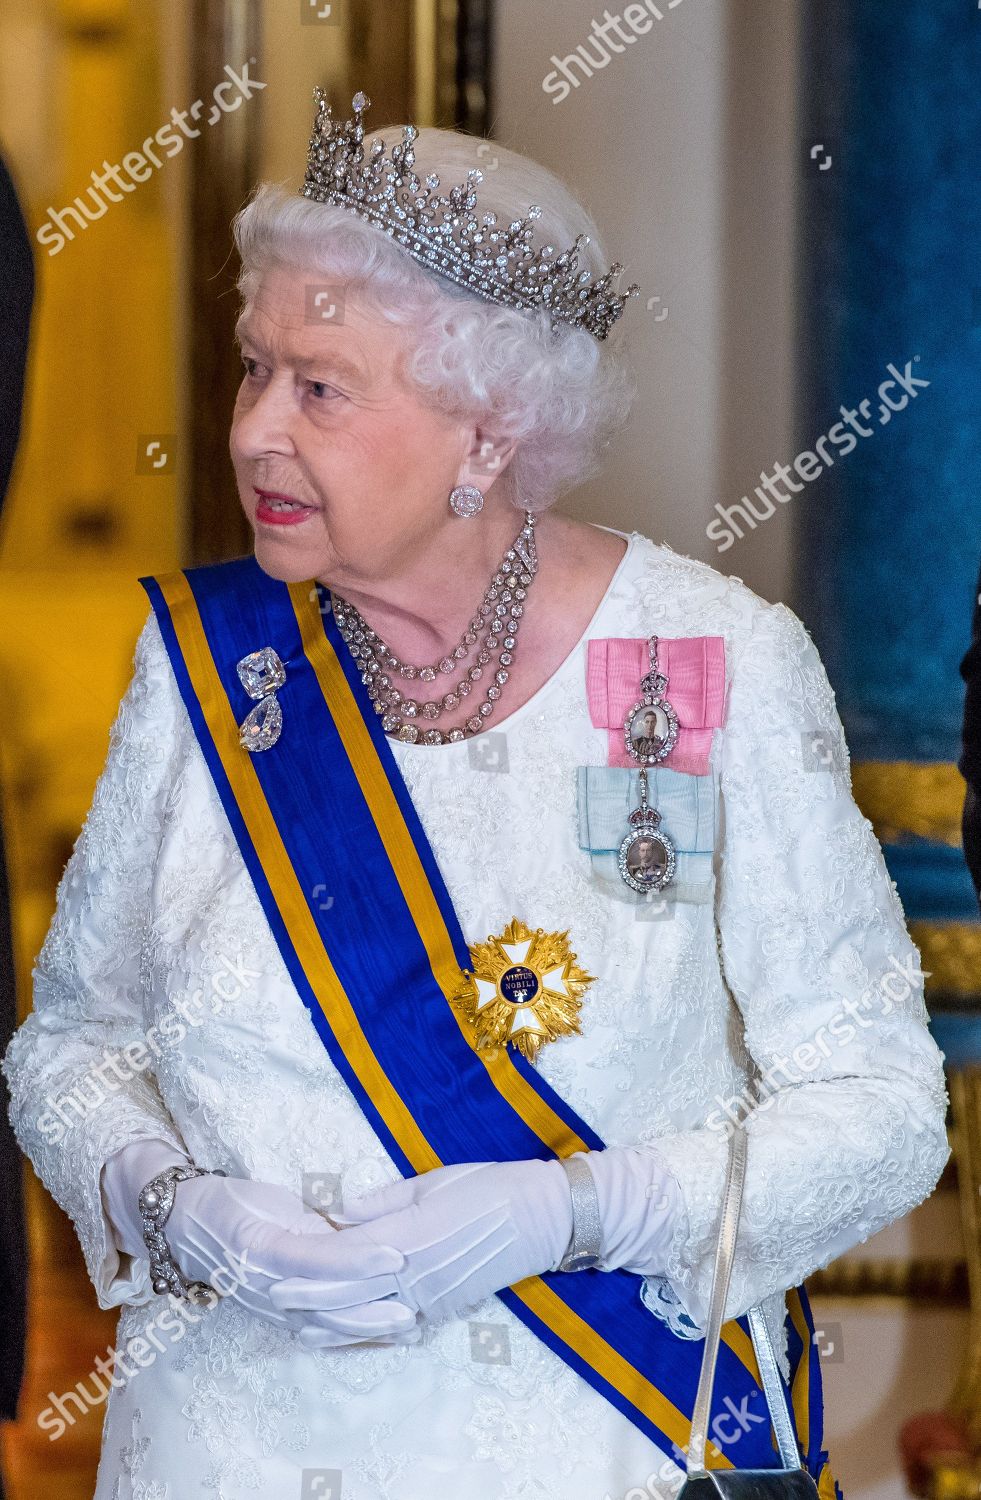 state-visit-of-the-king-and-queen-of-the-netherlands-london-uk-shutterstock-editorial-9942632bg.jpg